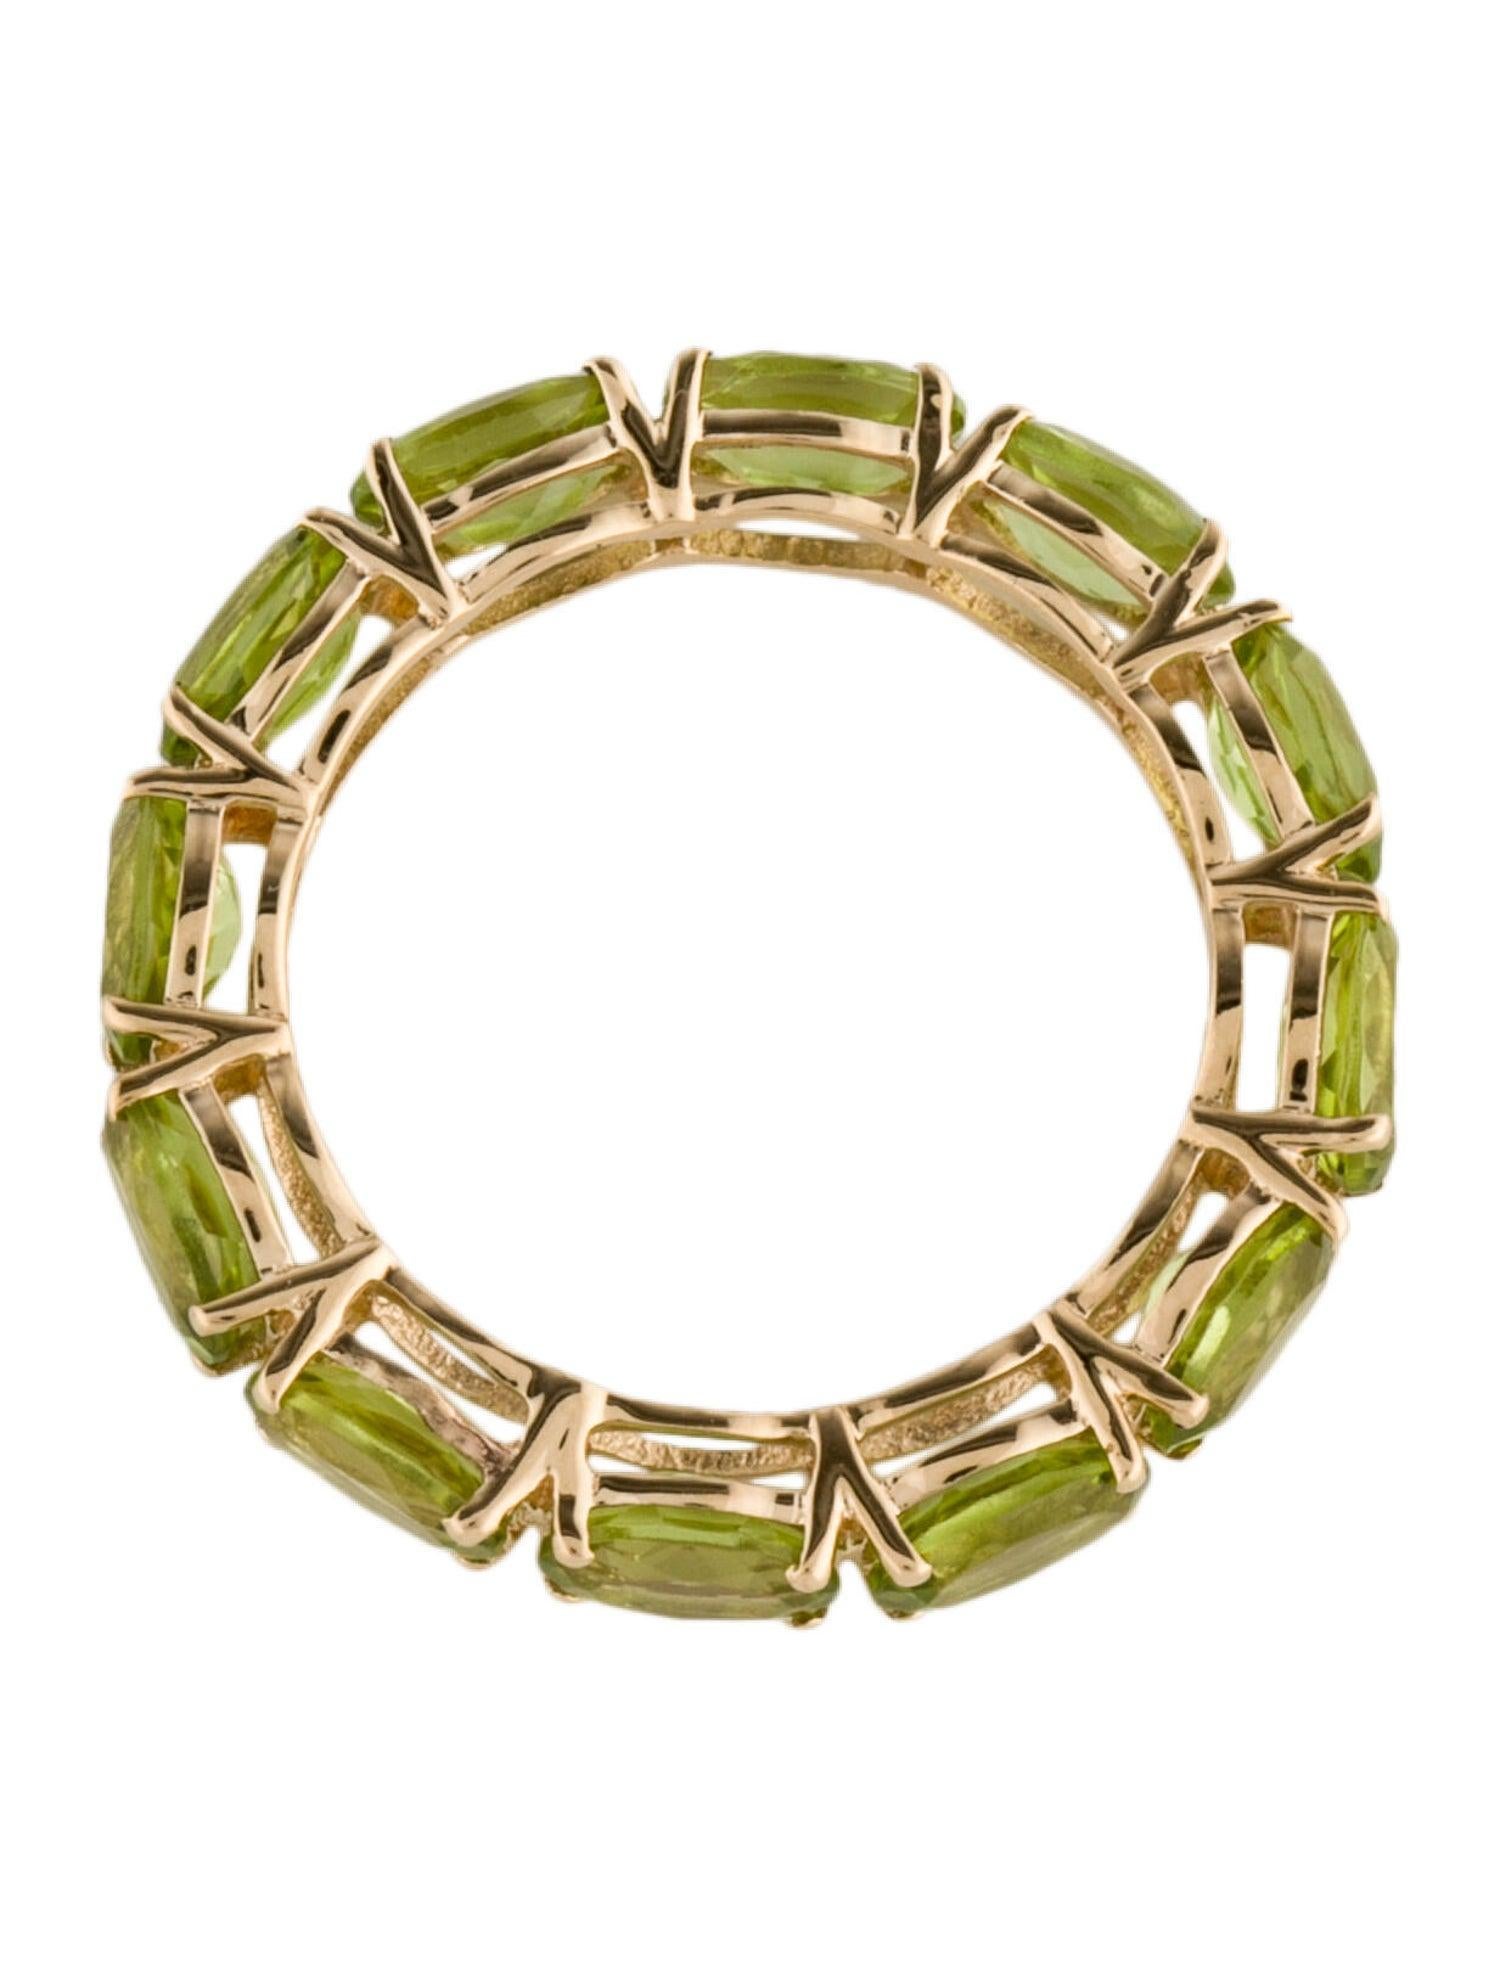 Stunning 14K Peridot Eternity Band Ring - Size 8  Luxurious Gemstone Jewelry In New Condition For Sale In Holtsville, NY